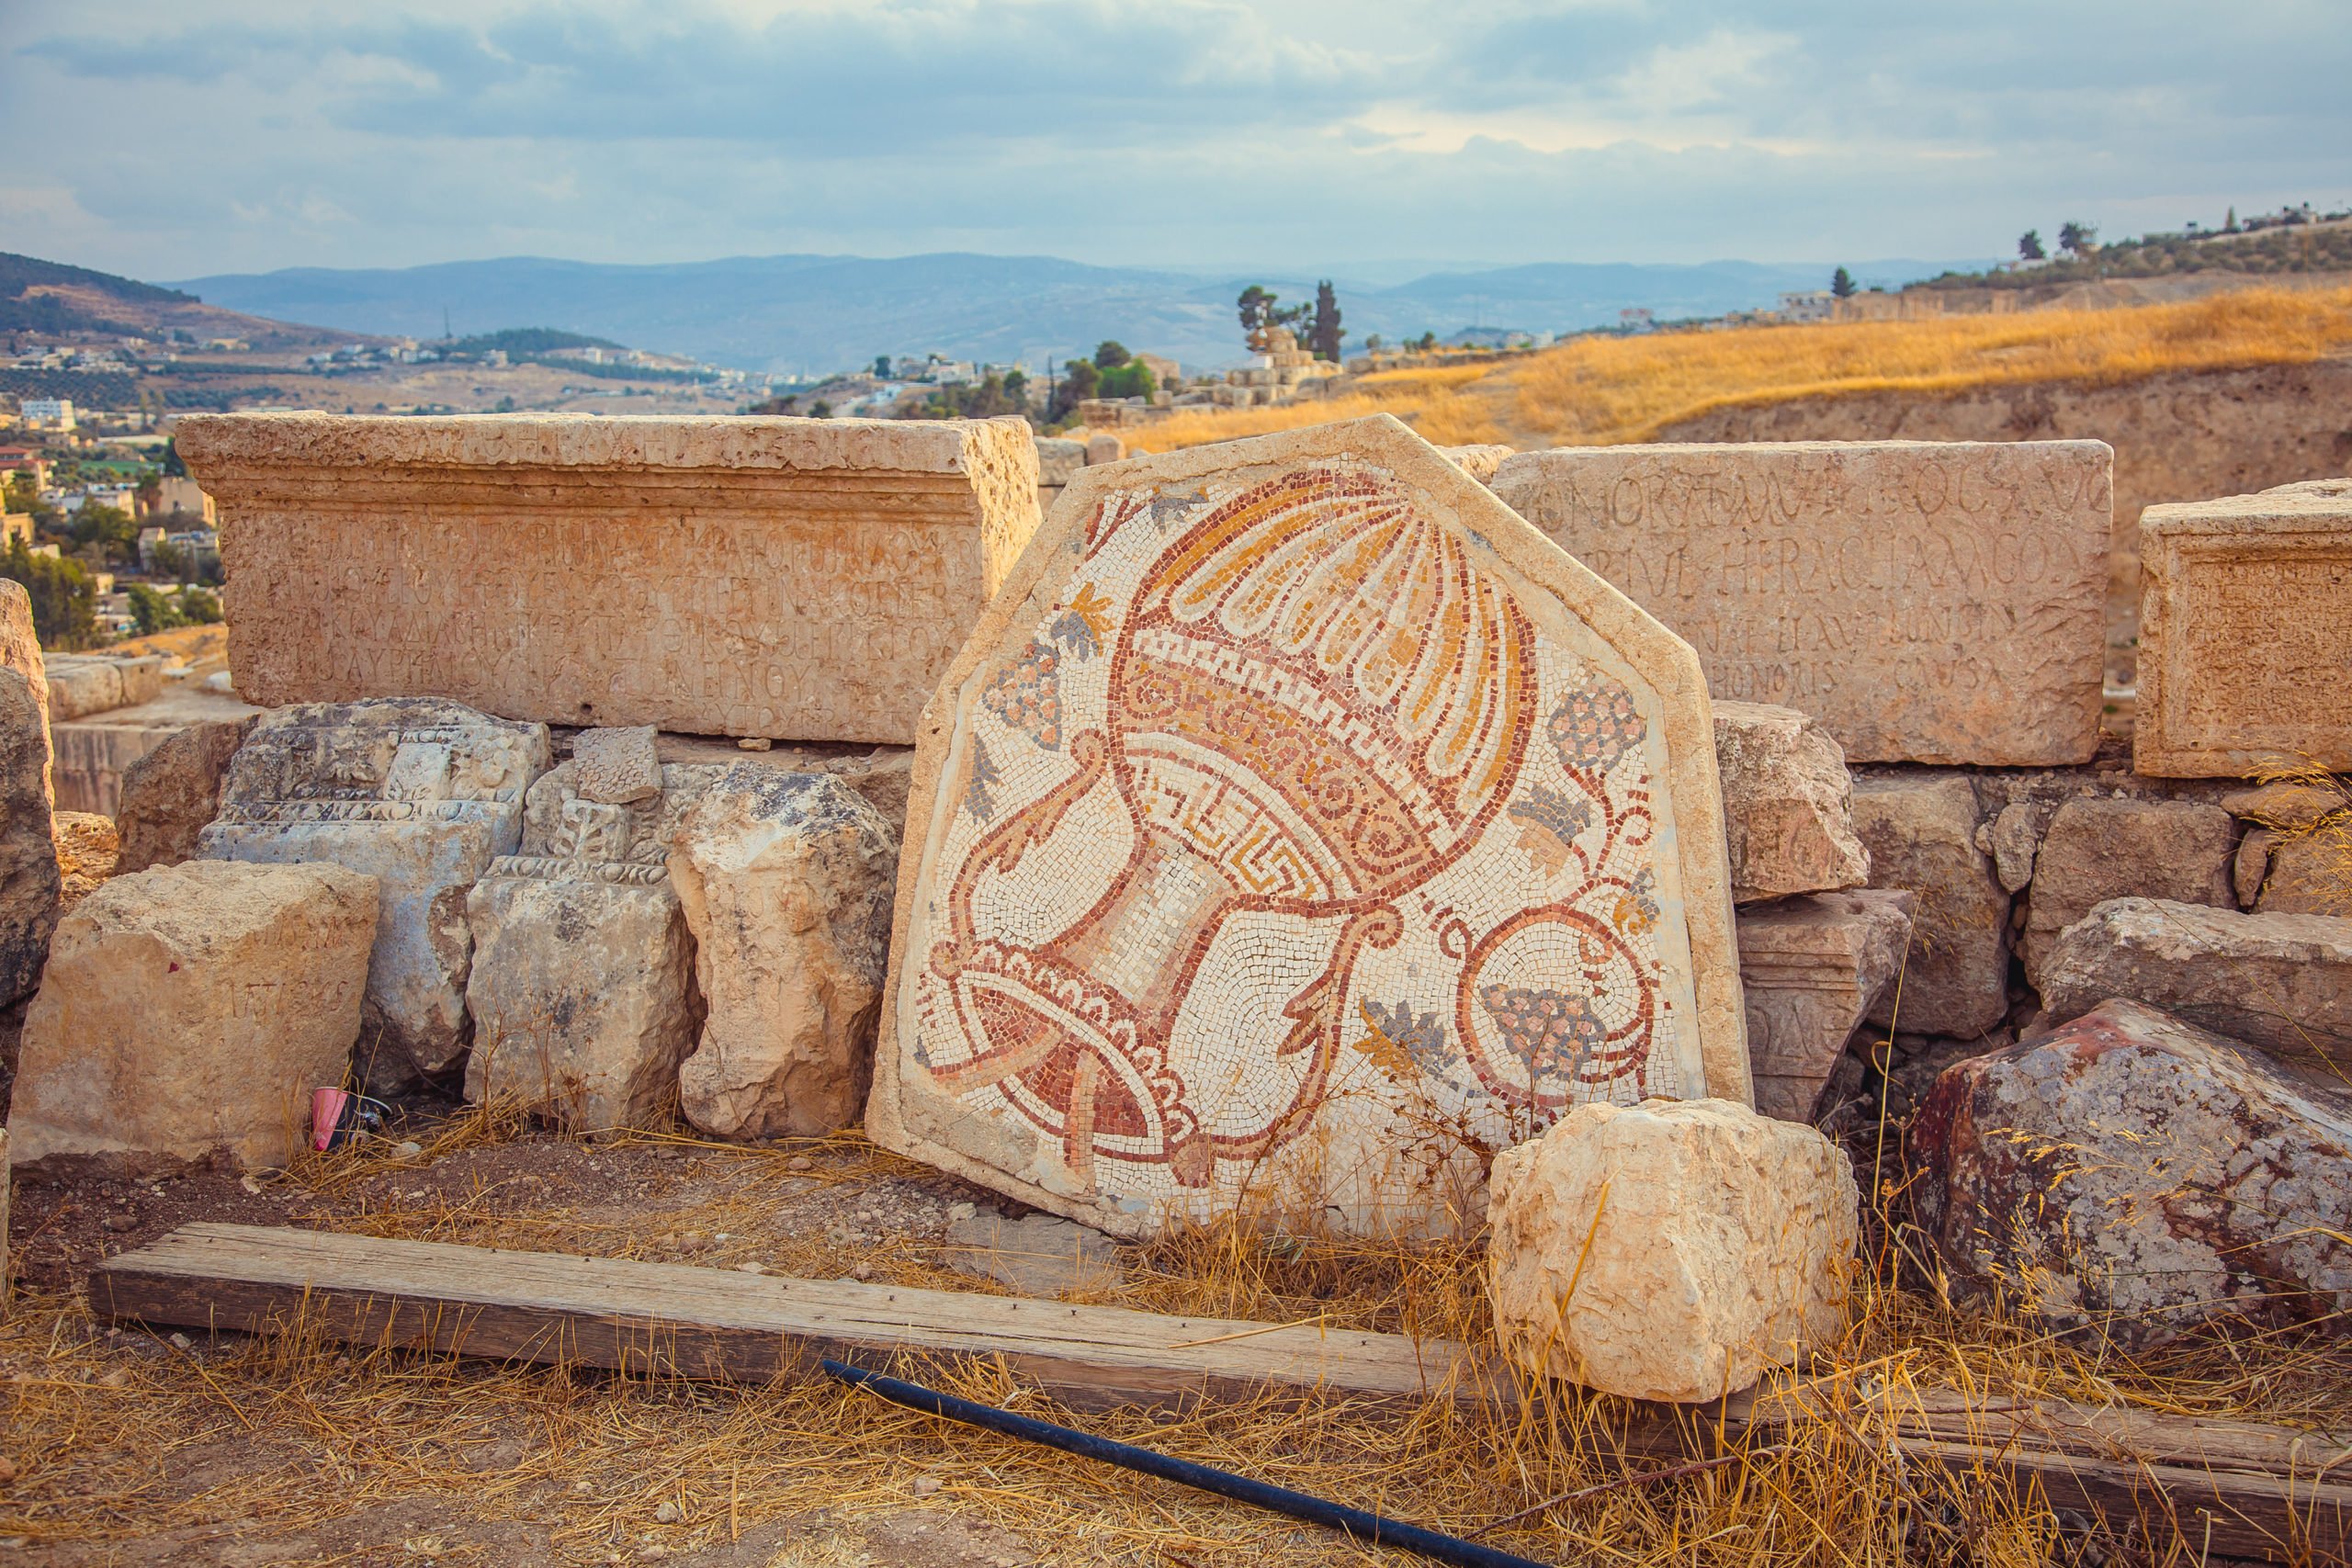 Admire The Roman Mosaics On The Highlights Of Jordan 4 Day Tour From Amman Or The Dead Sea